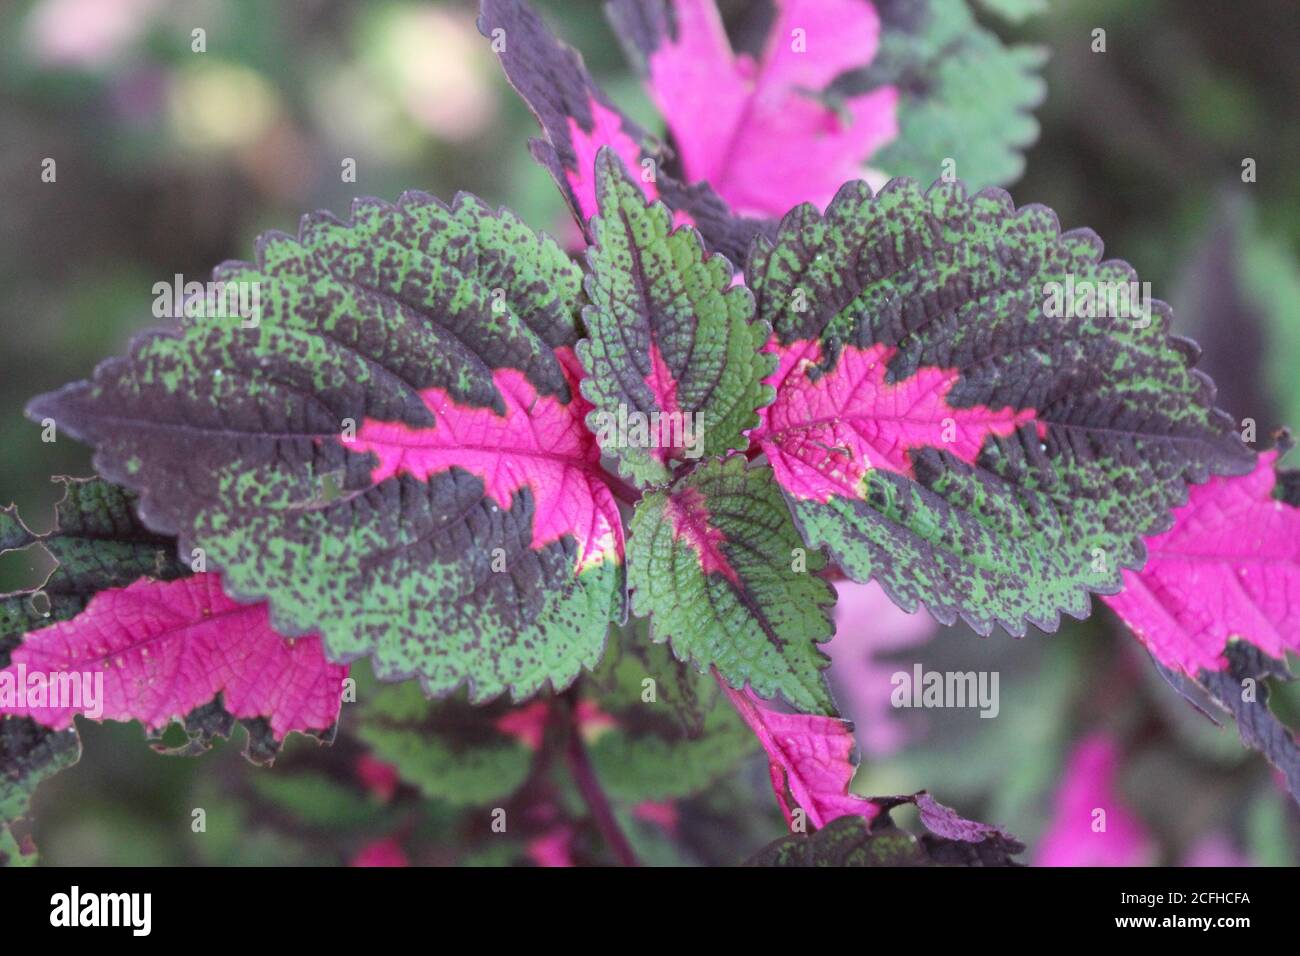 Multi colored leaves pink,purple and green color leaves growing in garden Stock Photo